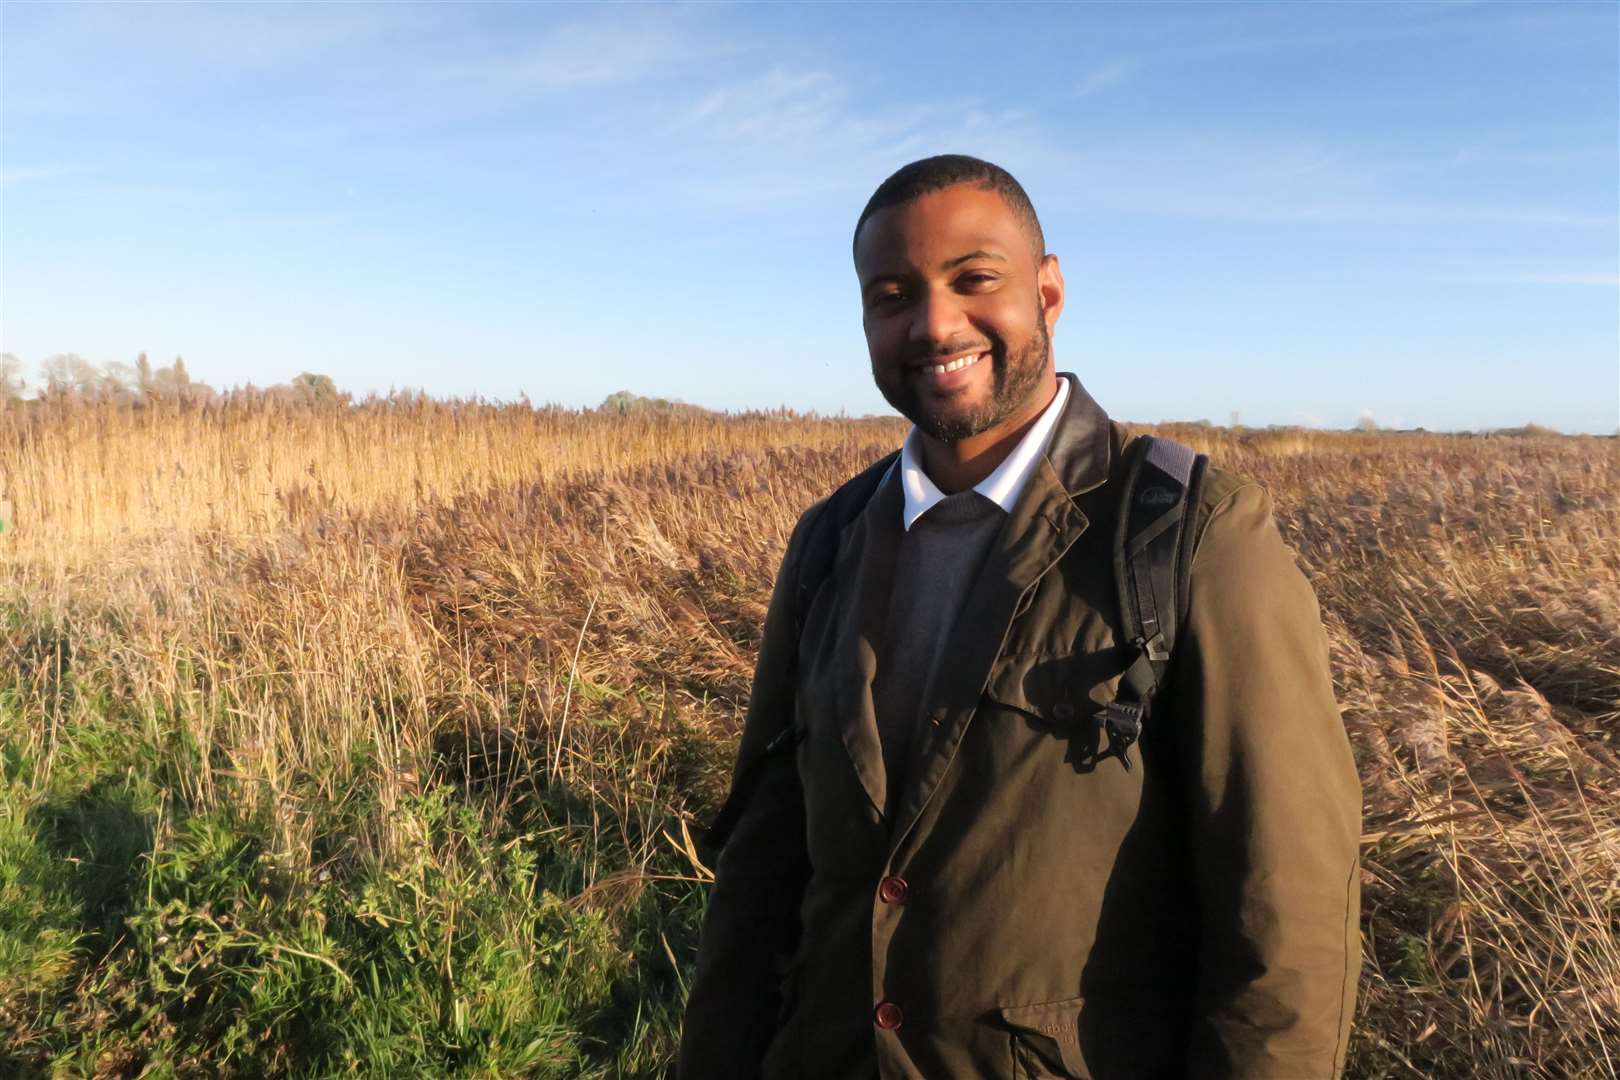 JB Gill, formerly of JLS and now a farmer in Kent, will be on the BBC